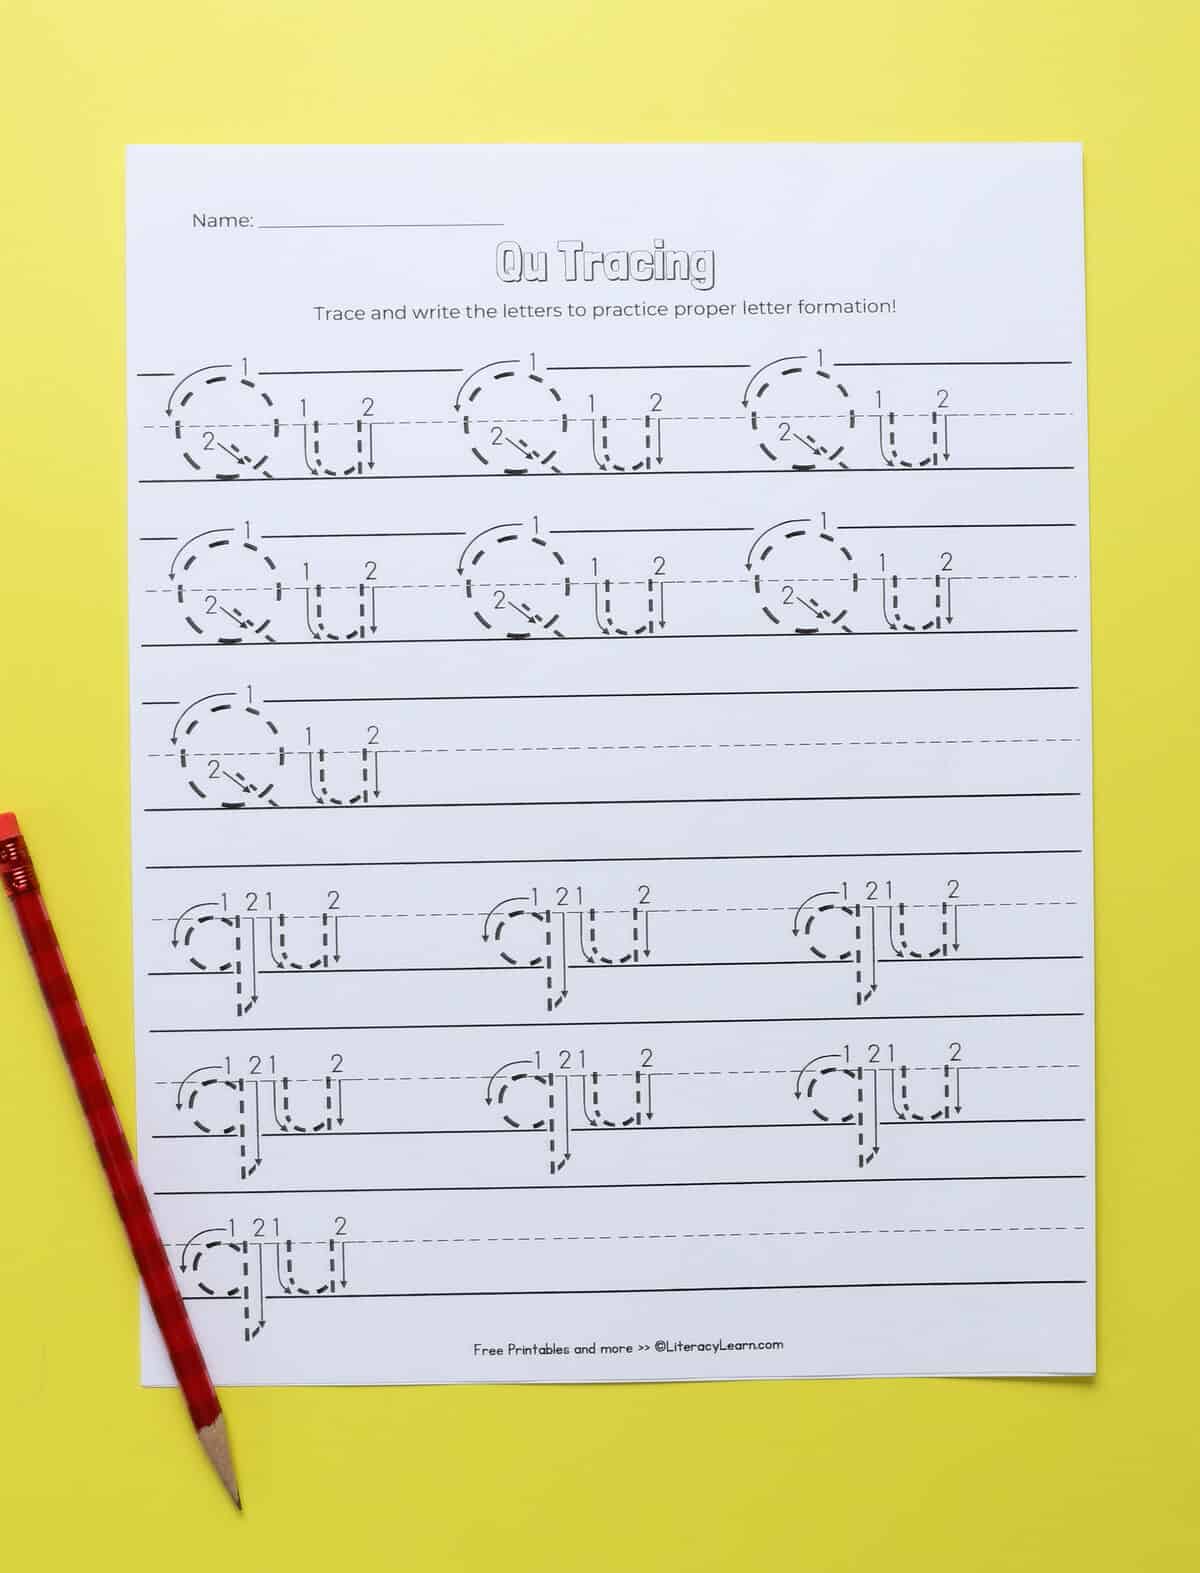 A printed letter q tracing and writing worksheet.